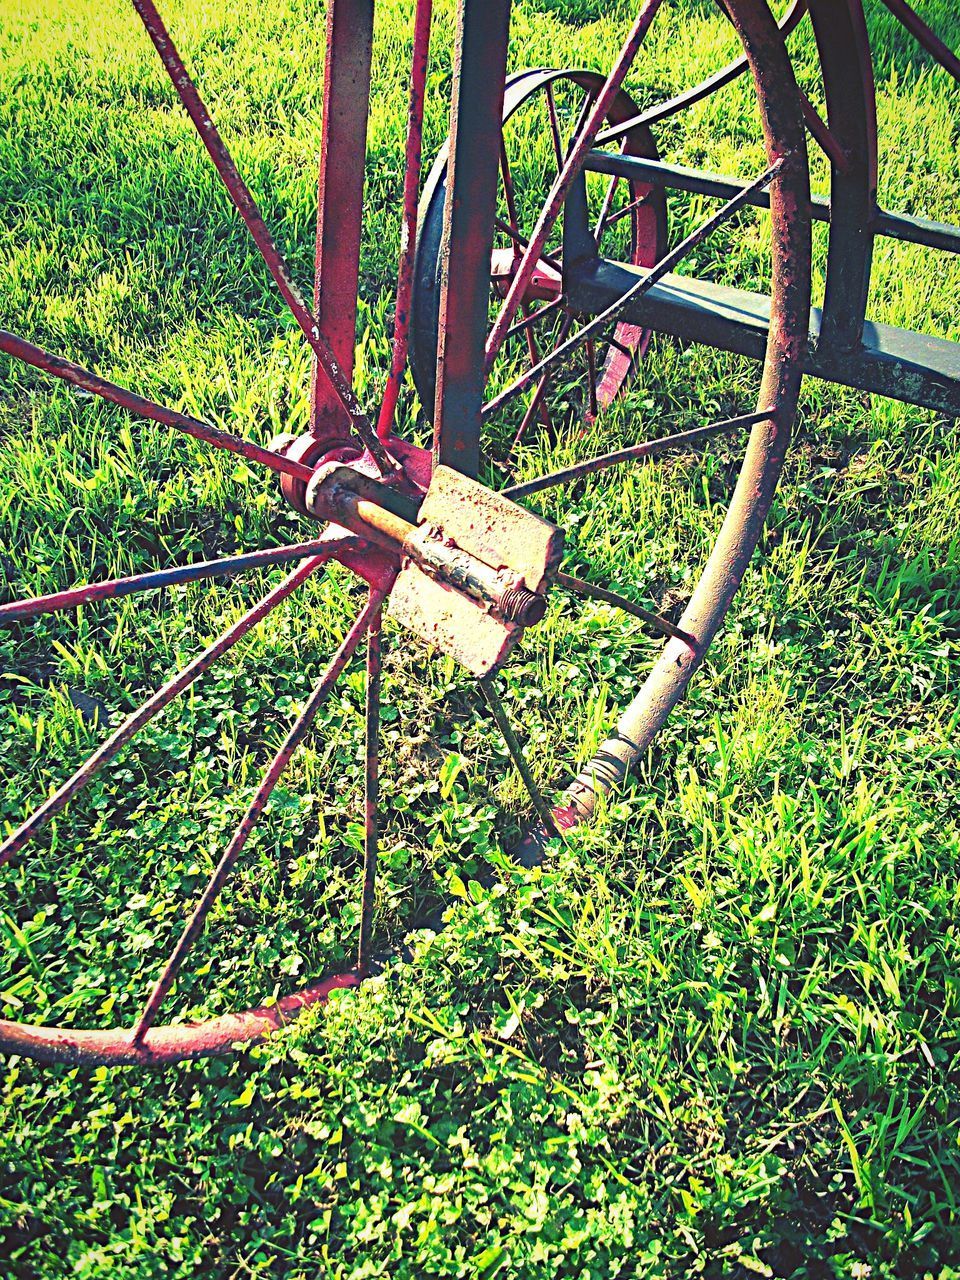 CLOSE-UP OF RUSTY BICYCLE WHEEL IN GRASS